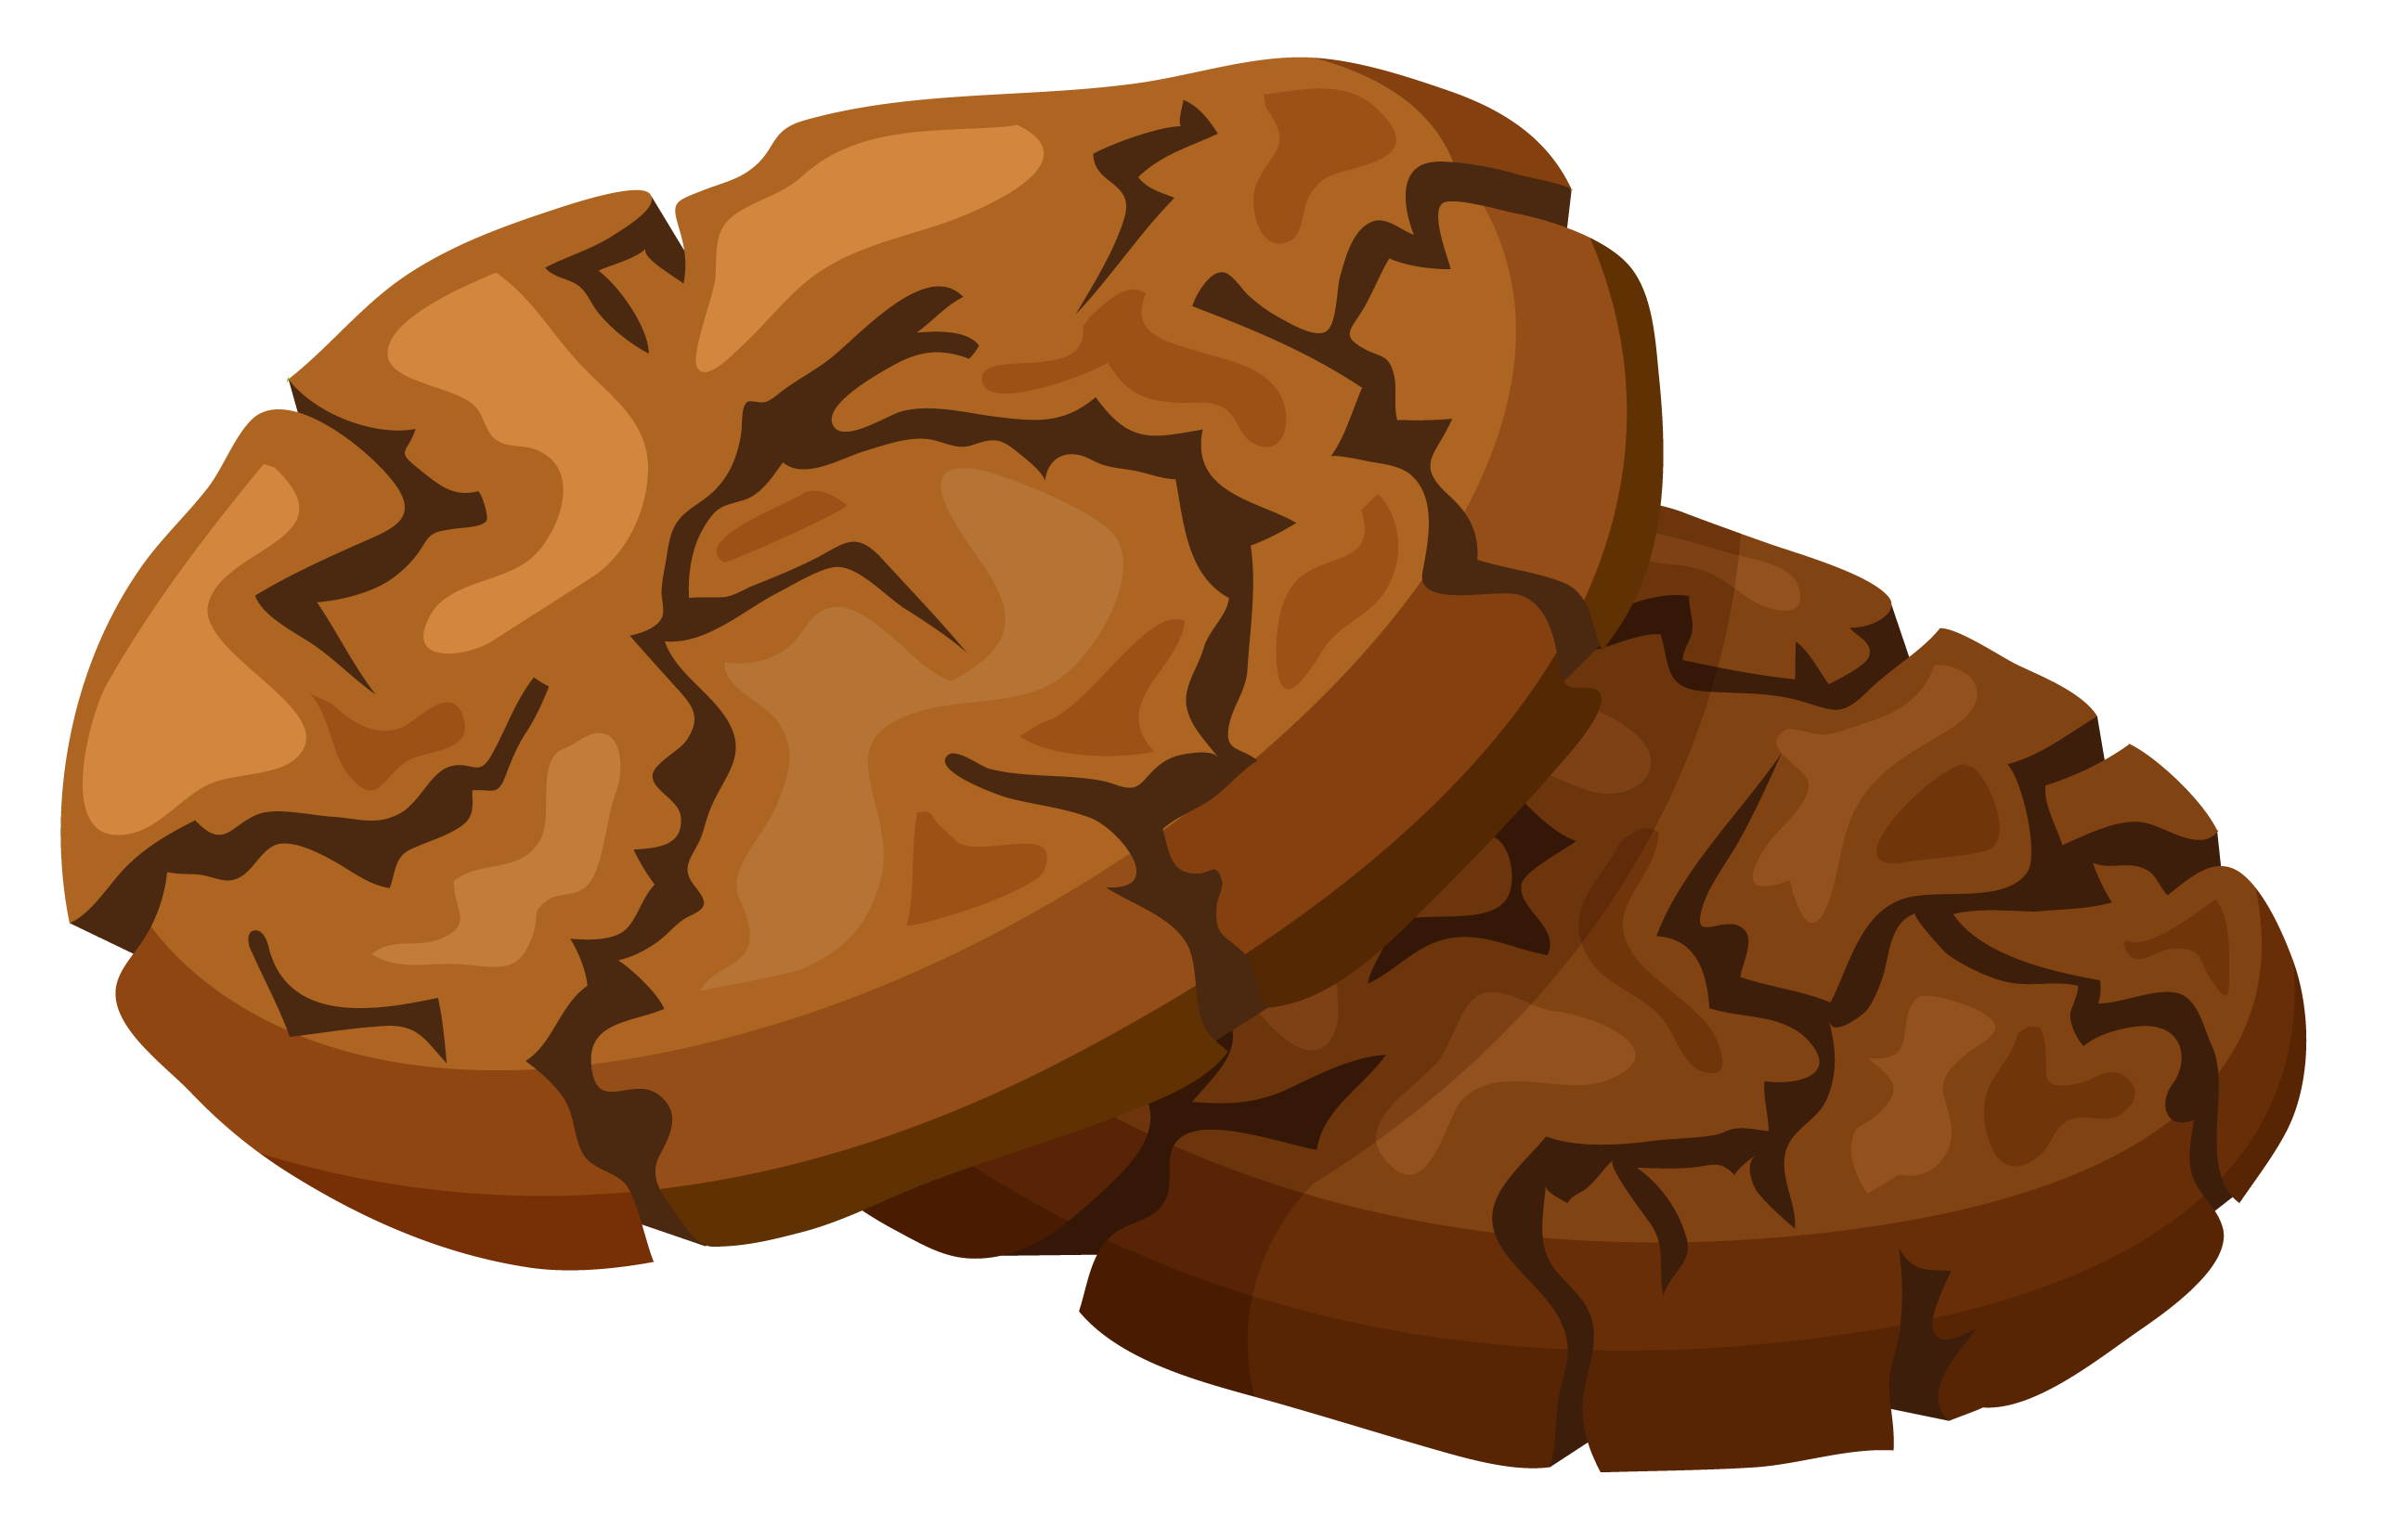 Cracked cookies png image. Clipart free cookie